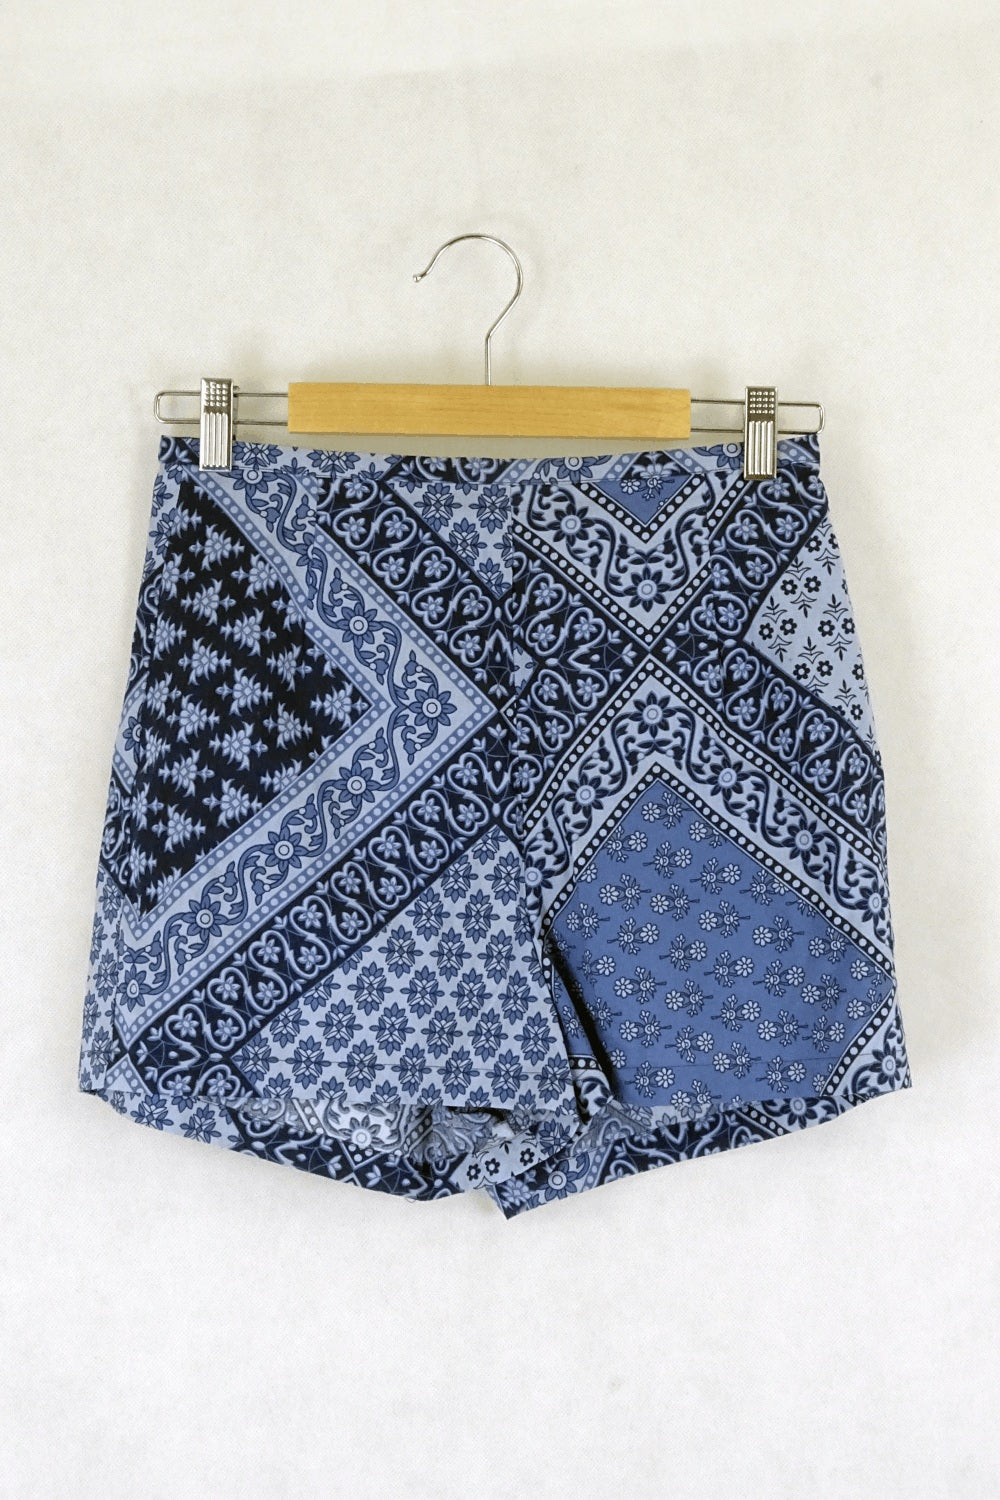 Lee Cotton High Waisted Shorts 10